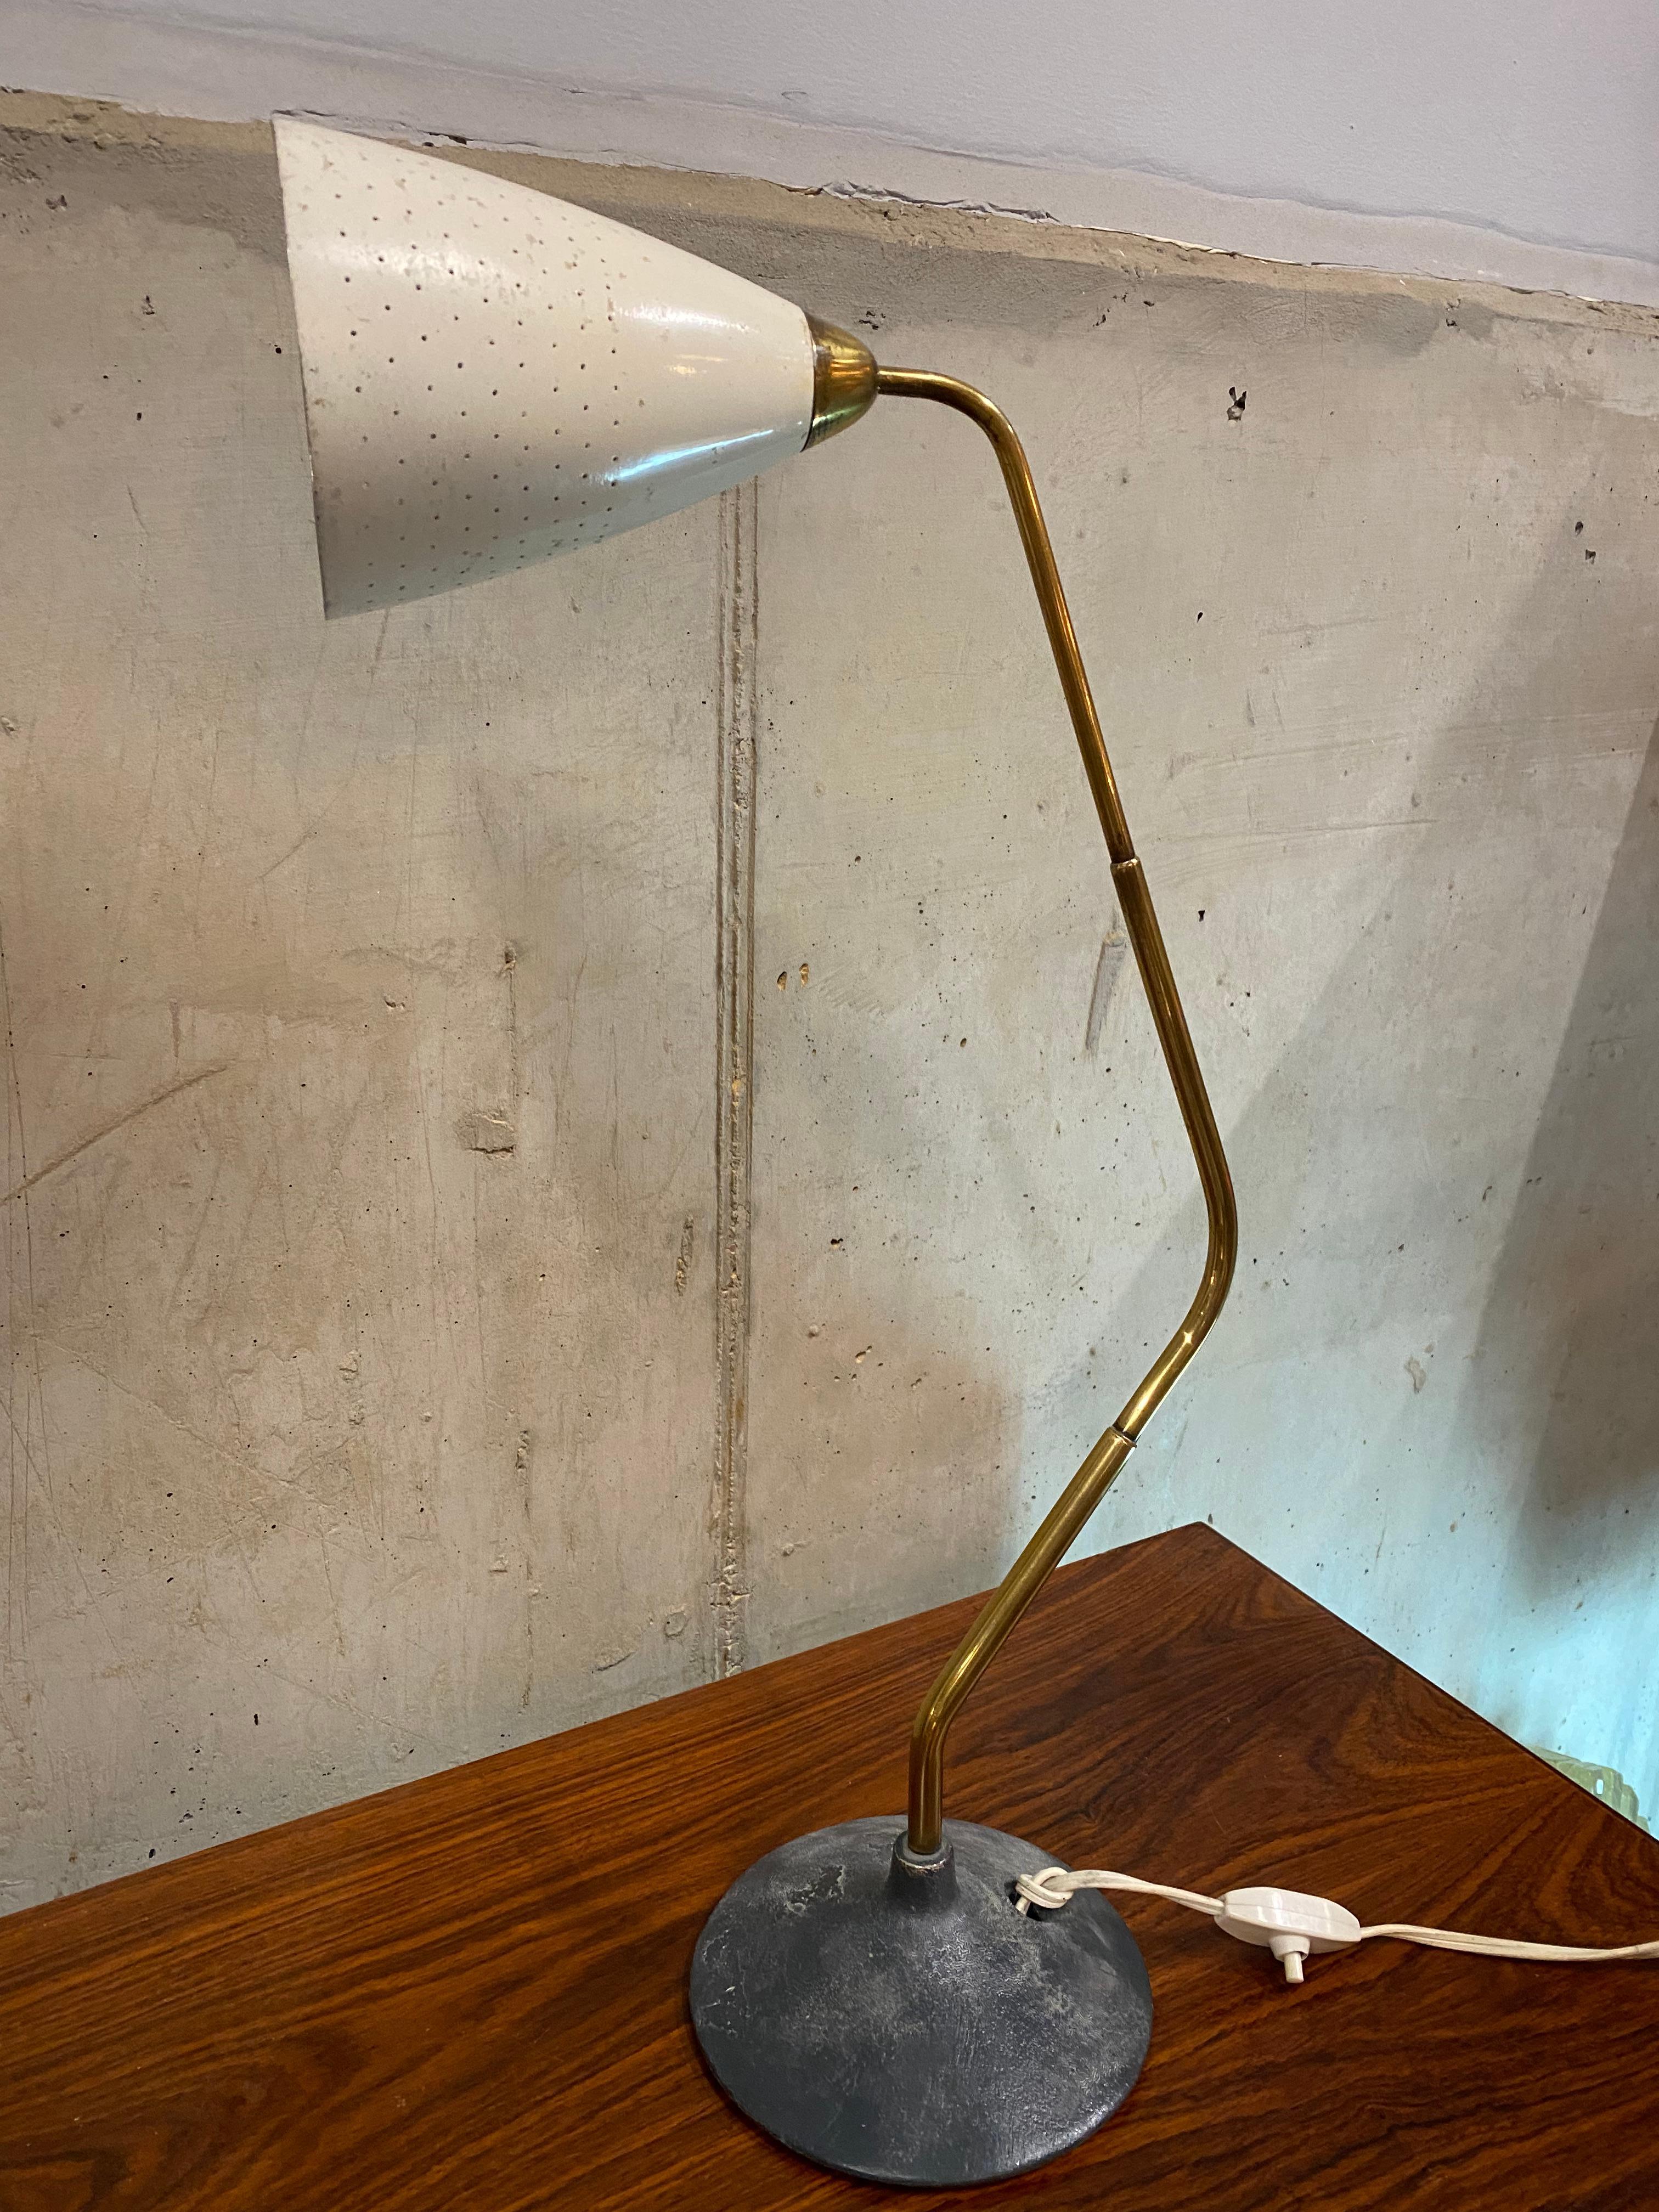 Flamingo table lamp designed by Karl Hagenauer for Hagenauer from the 1940s Karl Hagenauer designed this wonderful lamp for his Hagenauer workshops. The reduced design makes the lamp made of brass with creamy white perforated shade. Hagenauer